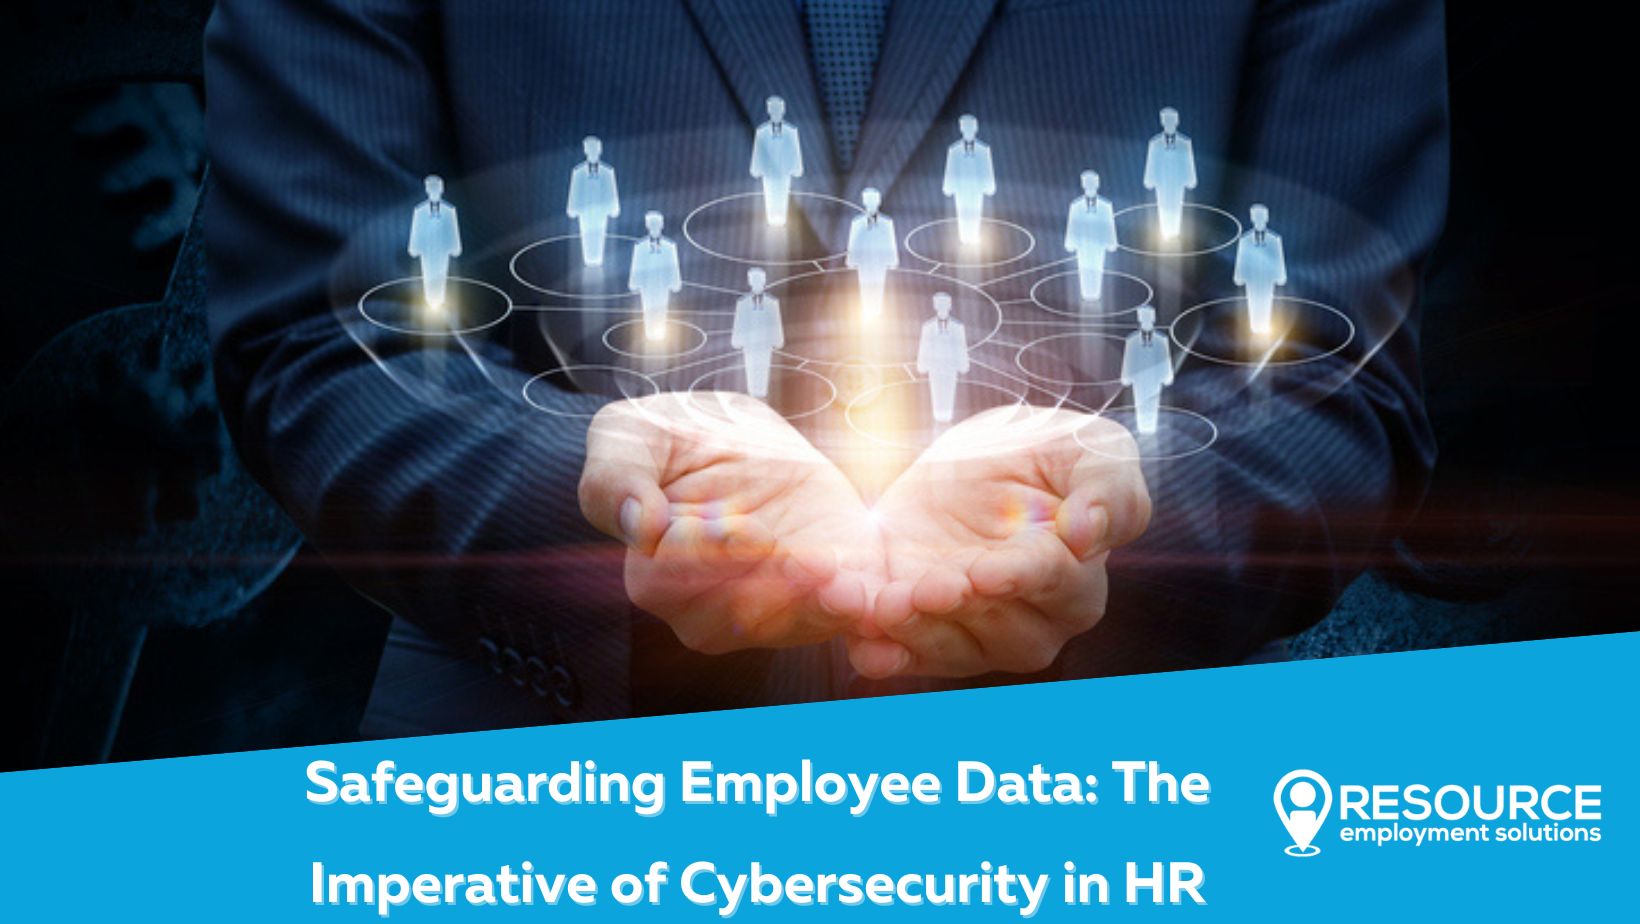 Safeguarding Employee Data: The Imperative of Cybersecurity in HR